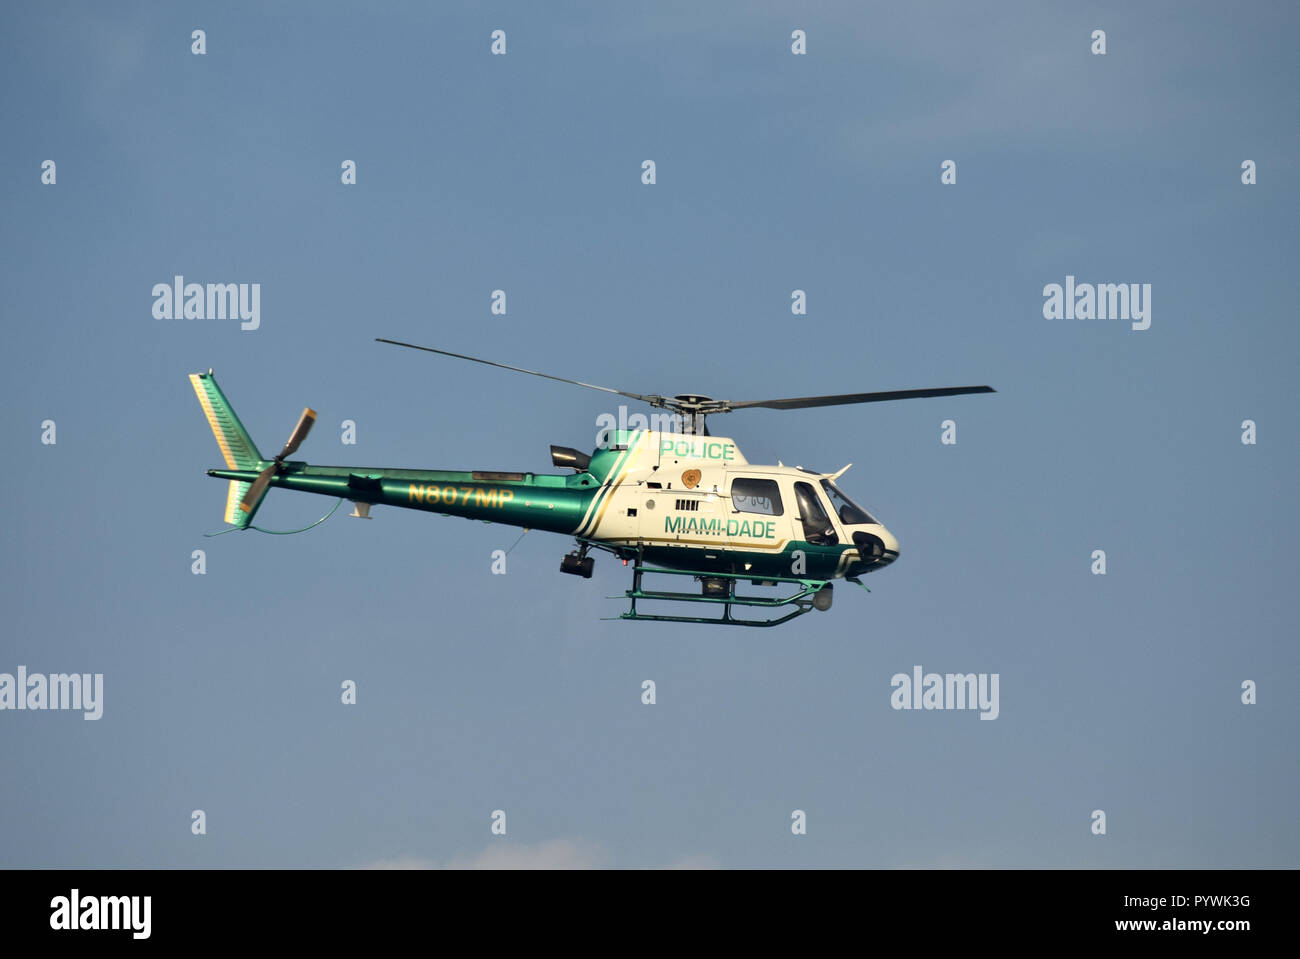 MIAMI - MARCH 27: Miami Dade County police helicopter departs on patrol over the city on March 27, 2017 from its home base Opa Locka Airport Stock Photo